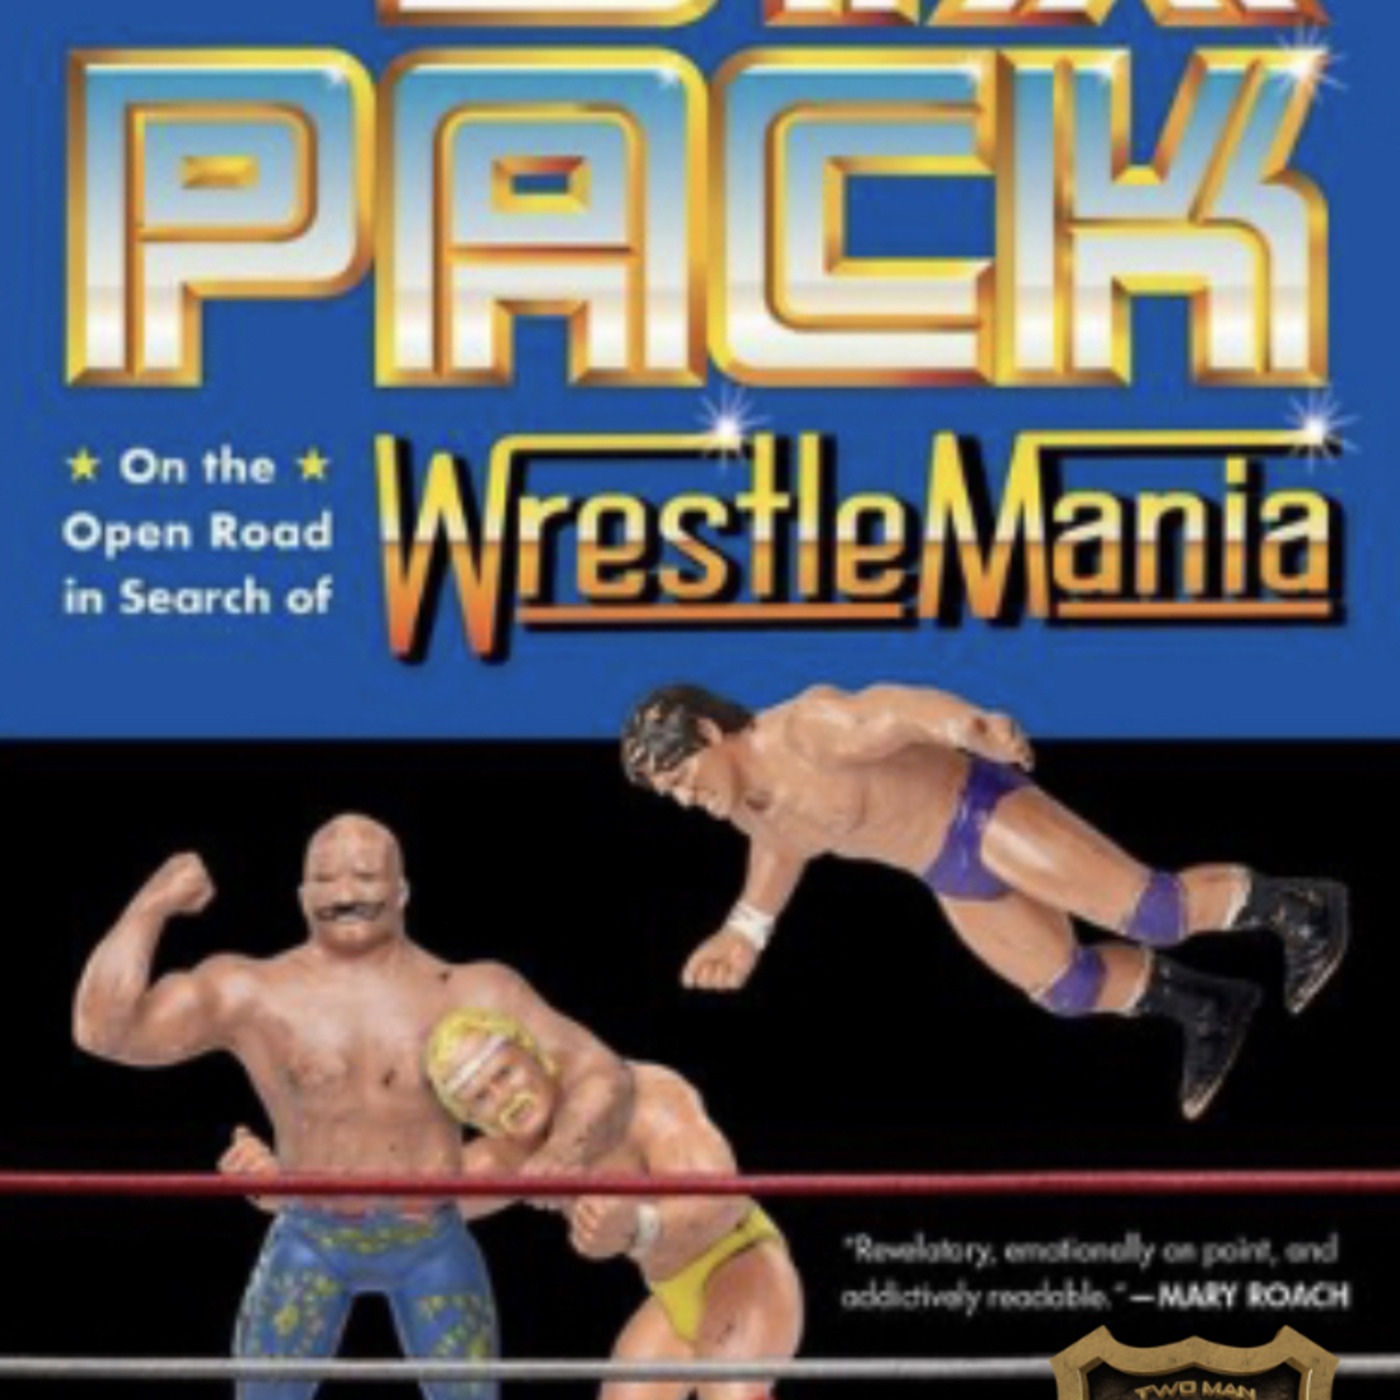 Episode 235: TMPT Feature Show: The Six Pack: On the Open Road in Search of Wrestlemania author Brad Balukjian